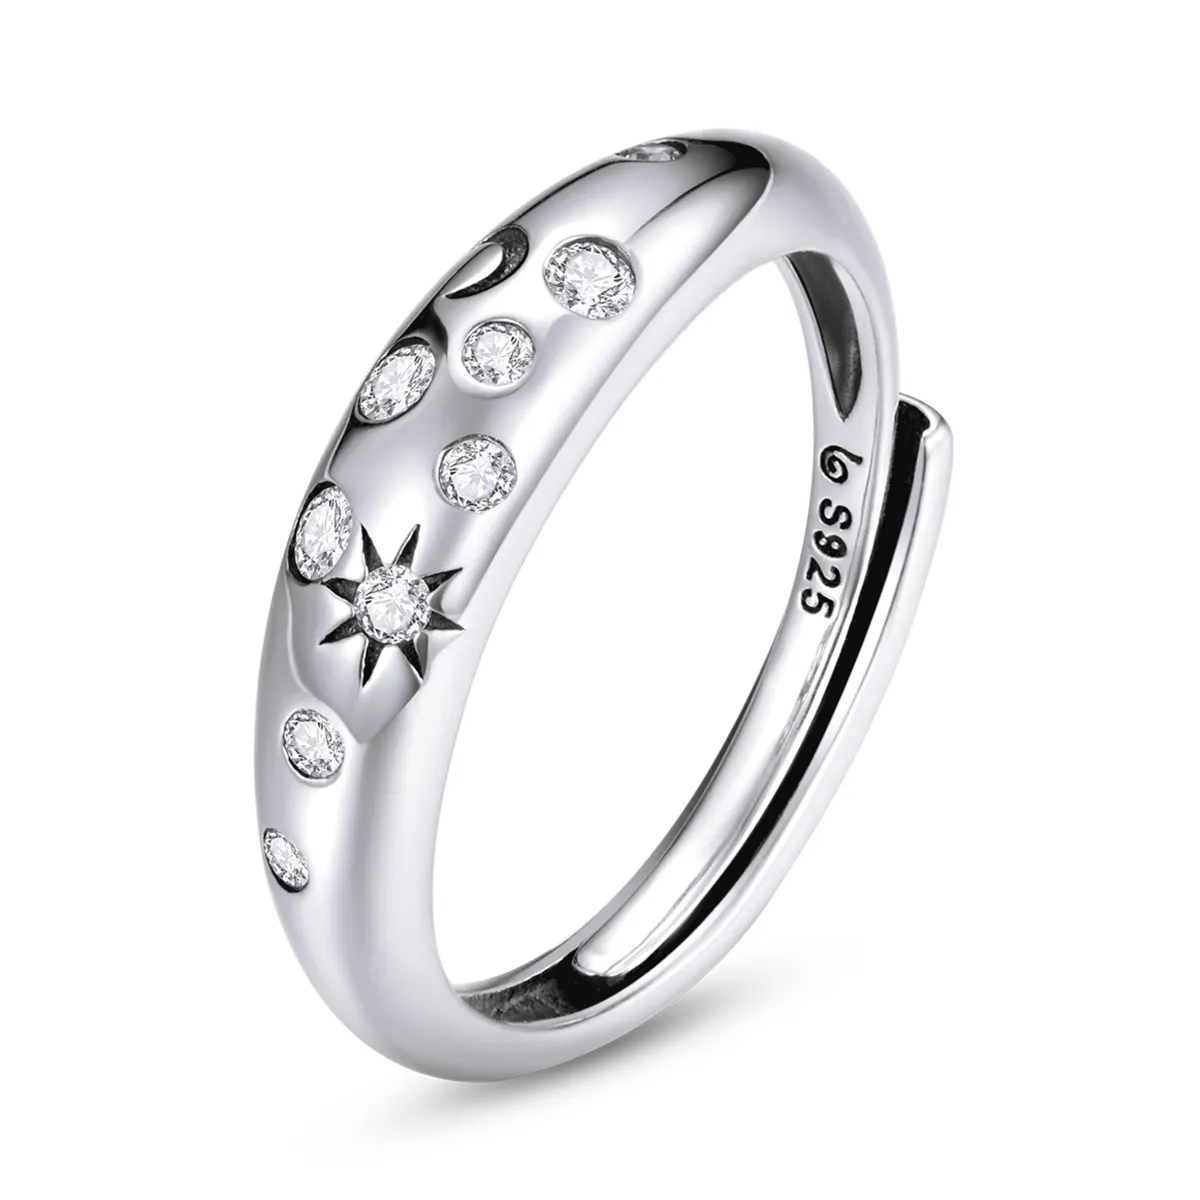 Star space s925 silver ring for men and women fashion starburst diamond open ring BSR182